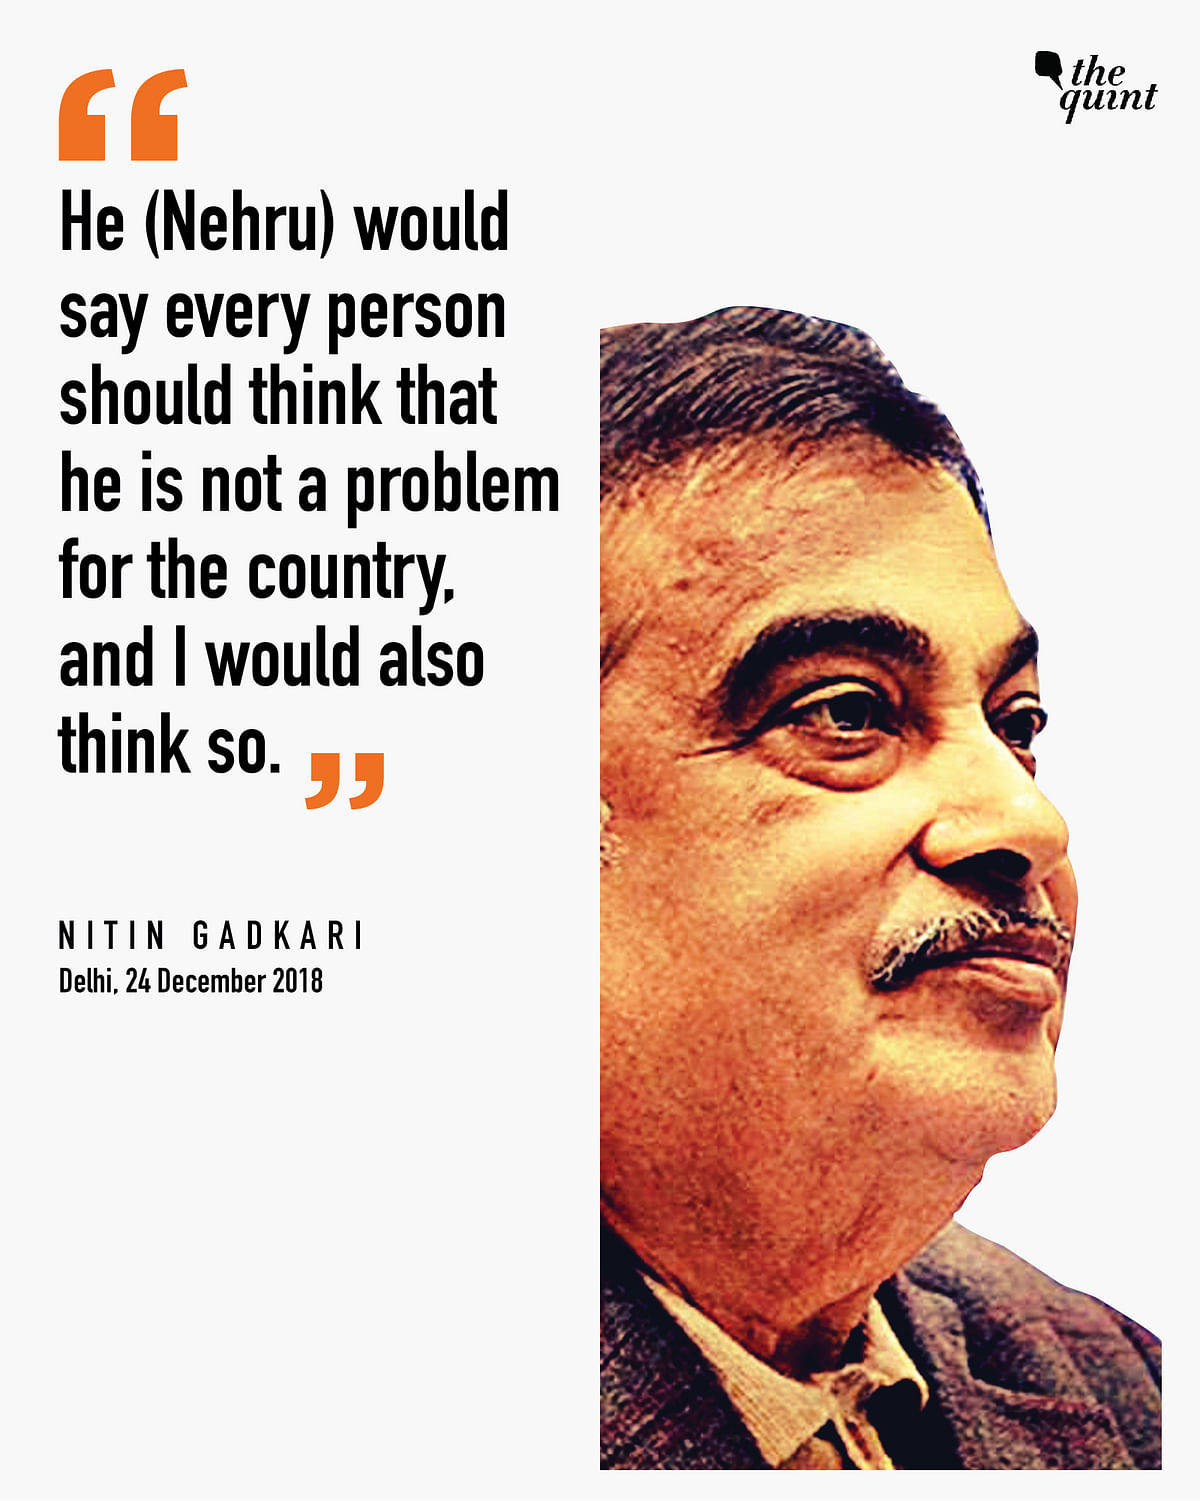 Recently, Gadkari had warned politicians against making promises that they couldn’t fulfill.